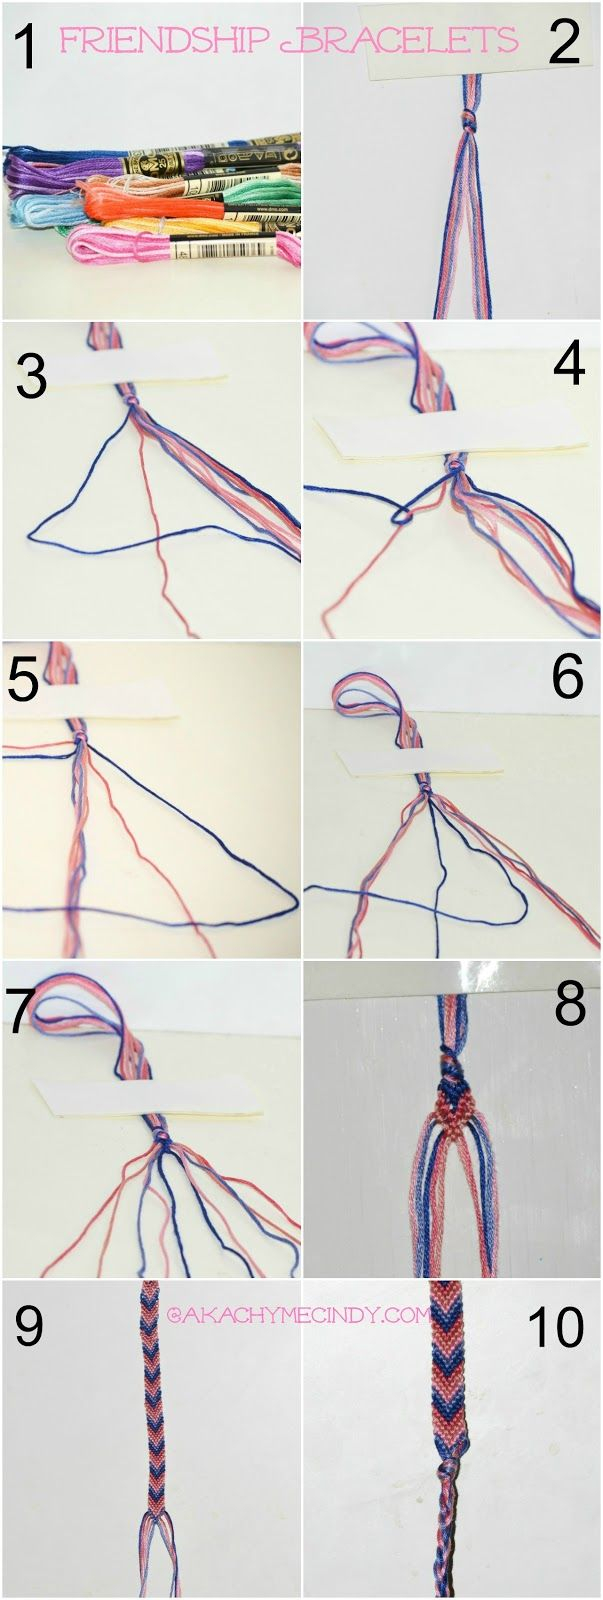 Embroidery Floss Bracelet Patterns 18 Making Bracelets With Embroidery Thread 15 Diy039s To Liven Up